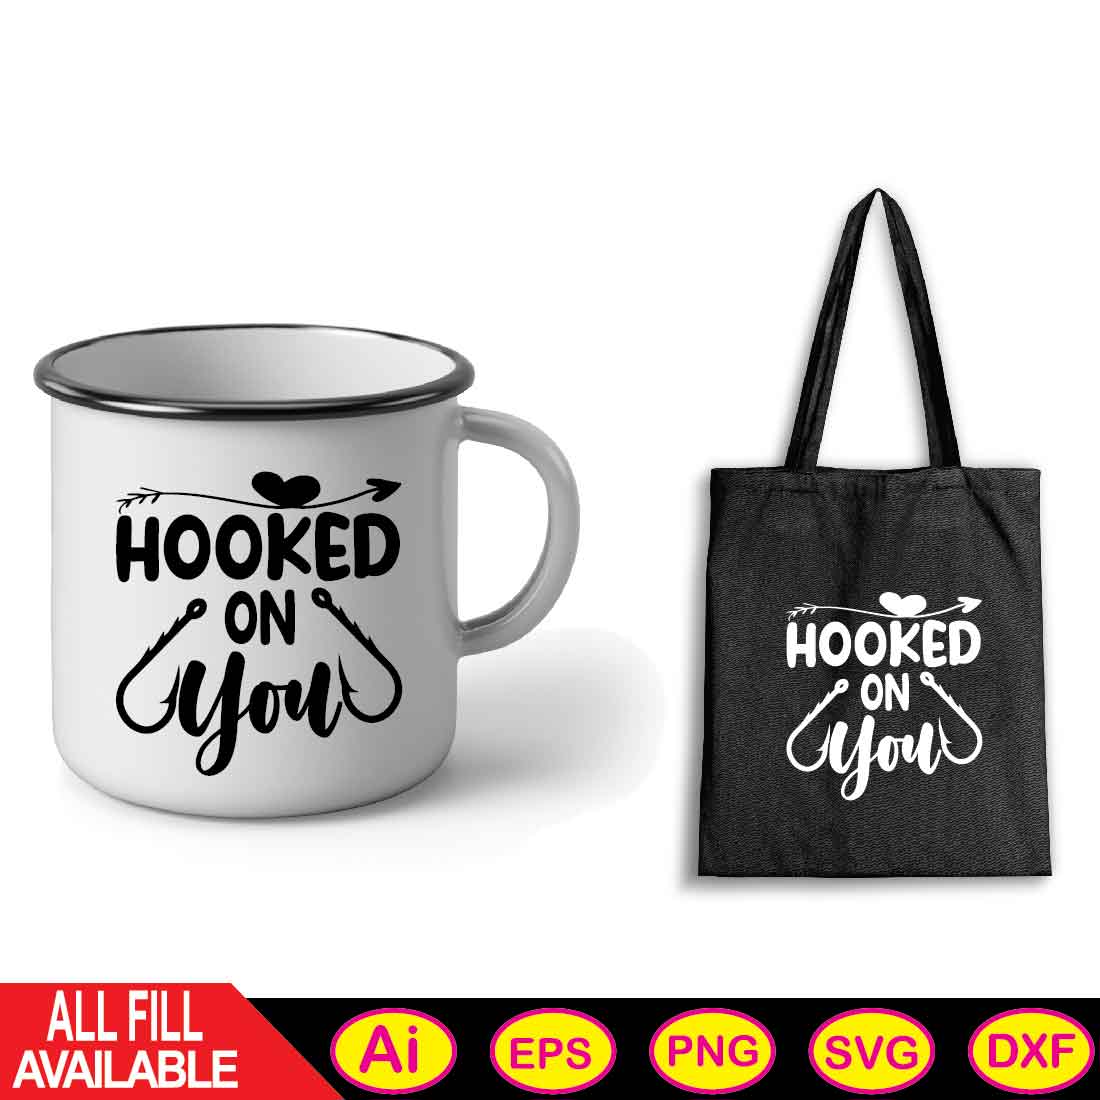 HOOKED ON you svg t-shirt preview image.